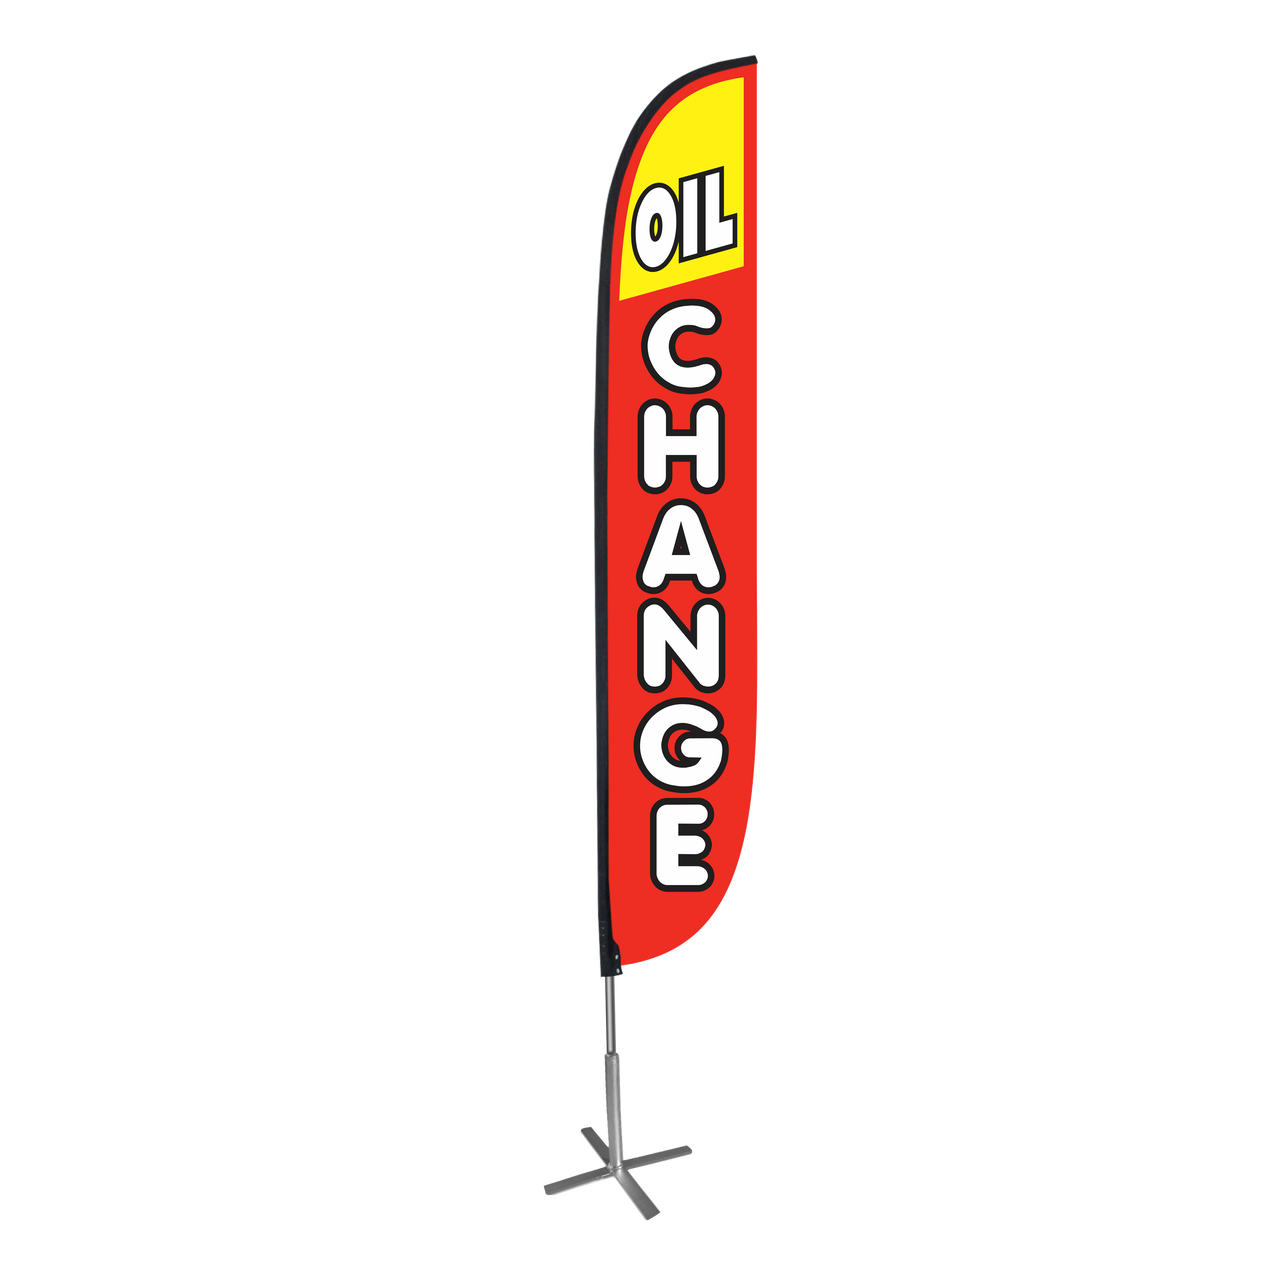 12ft Oil Change Feather Flag